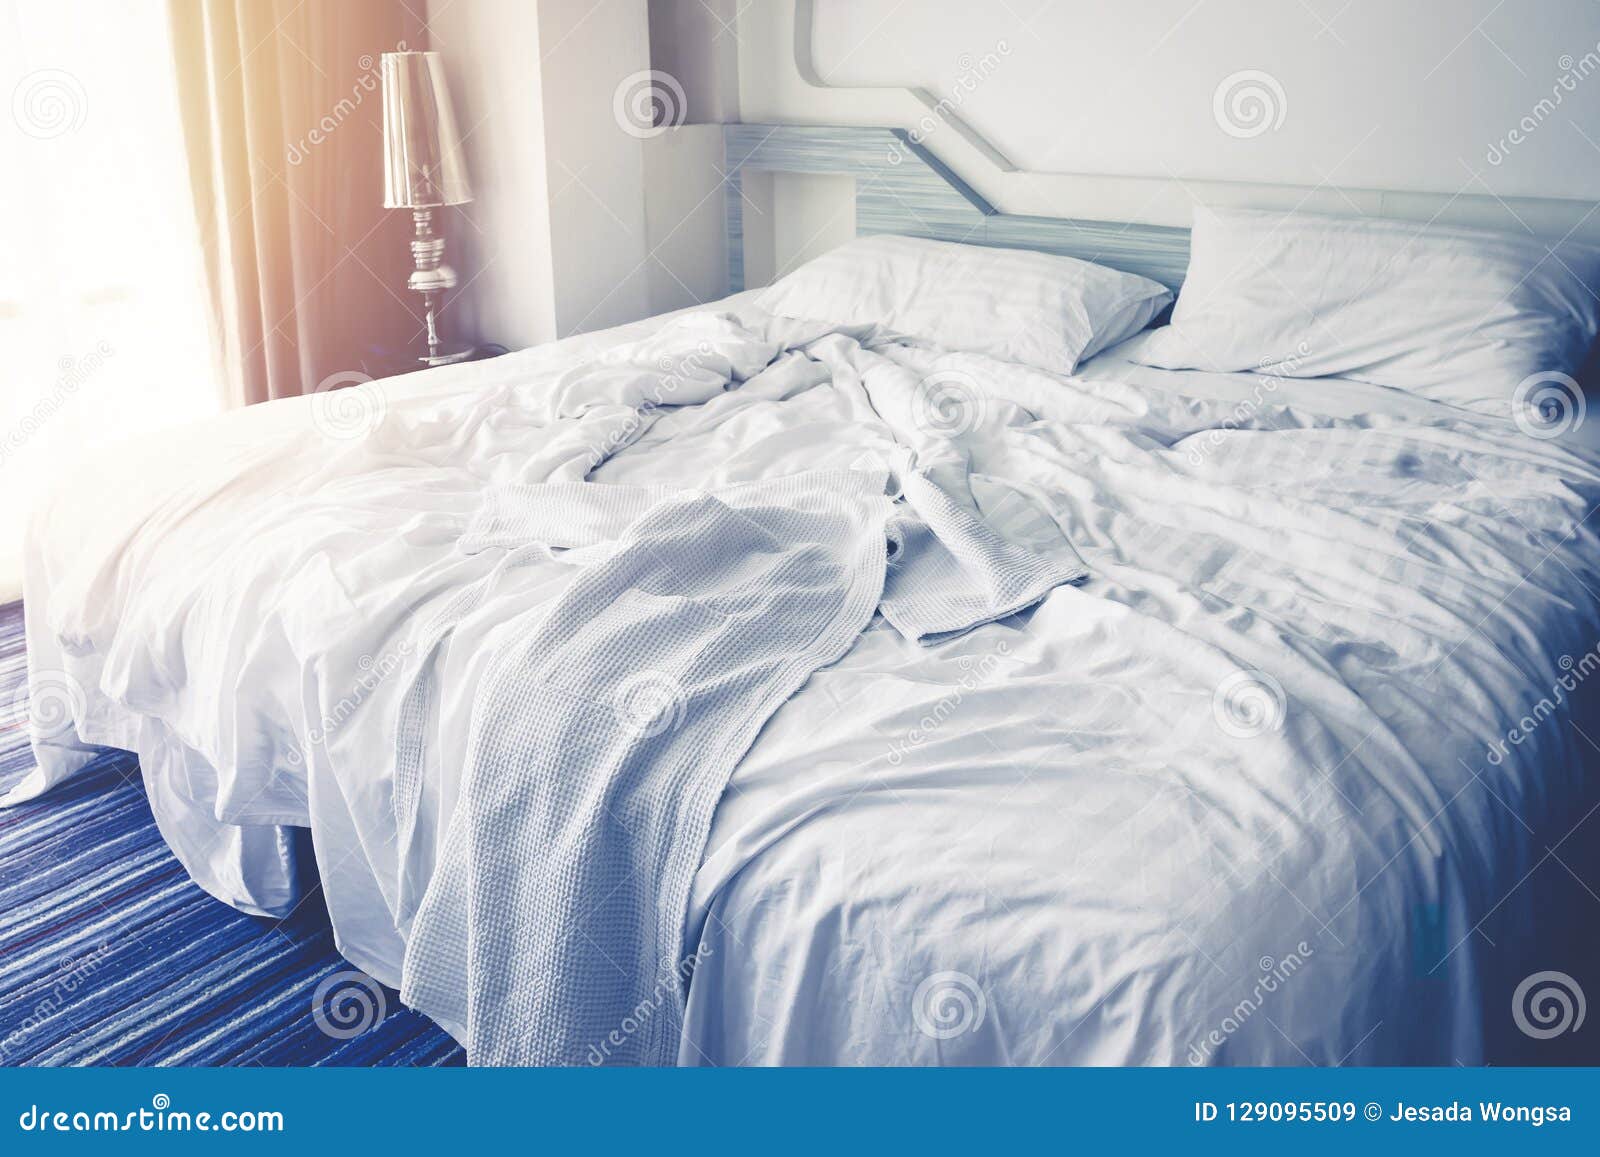 Comfortable Bedroom Messy Bedding Sheets And Duvet With Wrinkle